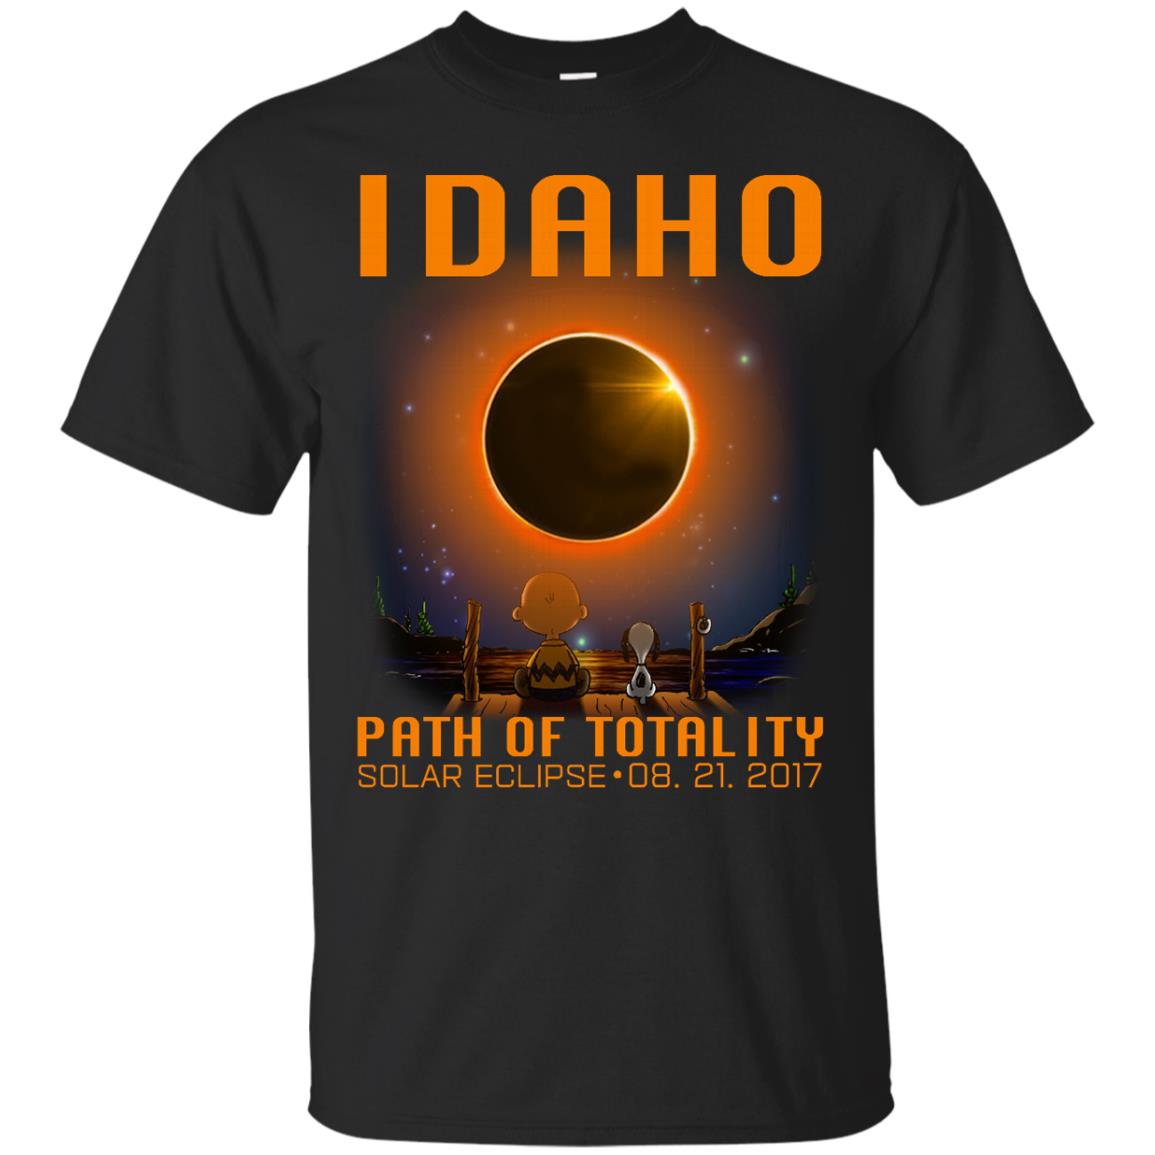 Snoopy and Charlie Brown - Idaho - Path of totality solar eclipse shirt